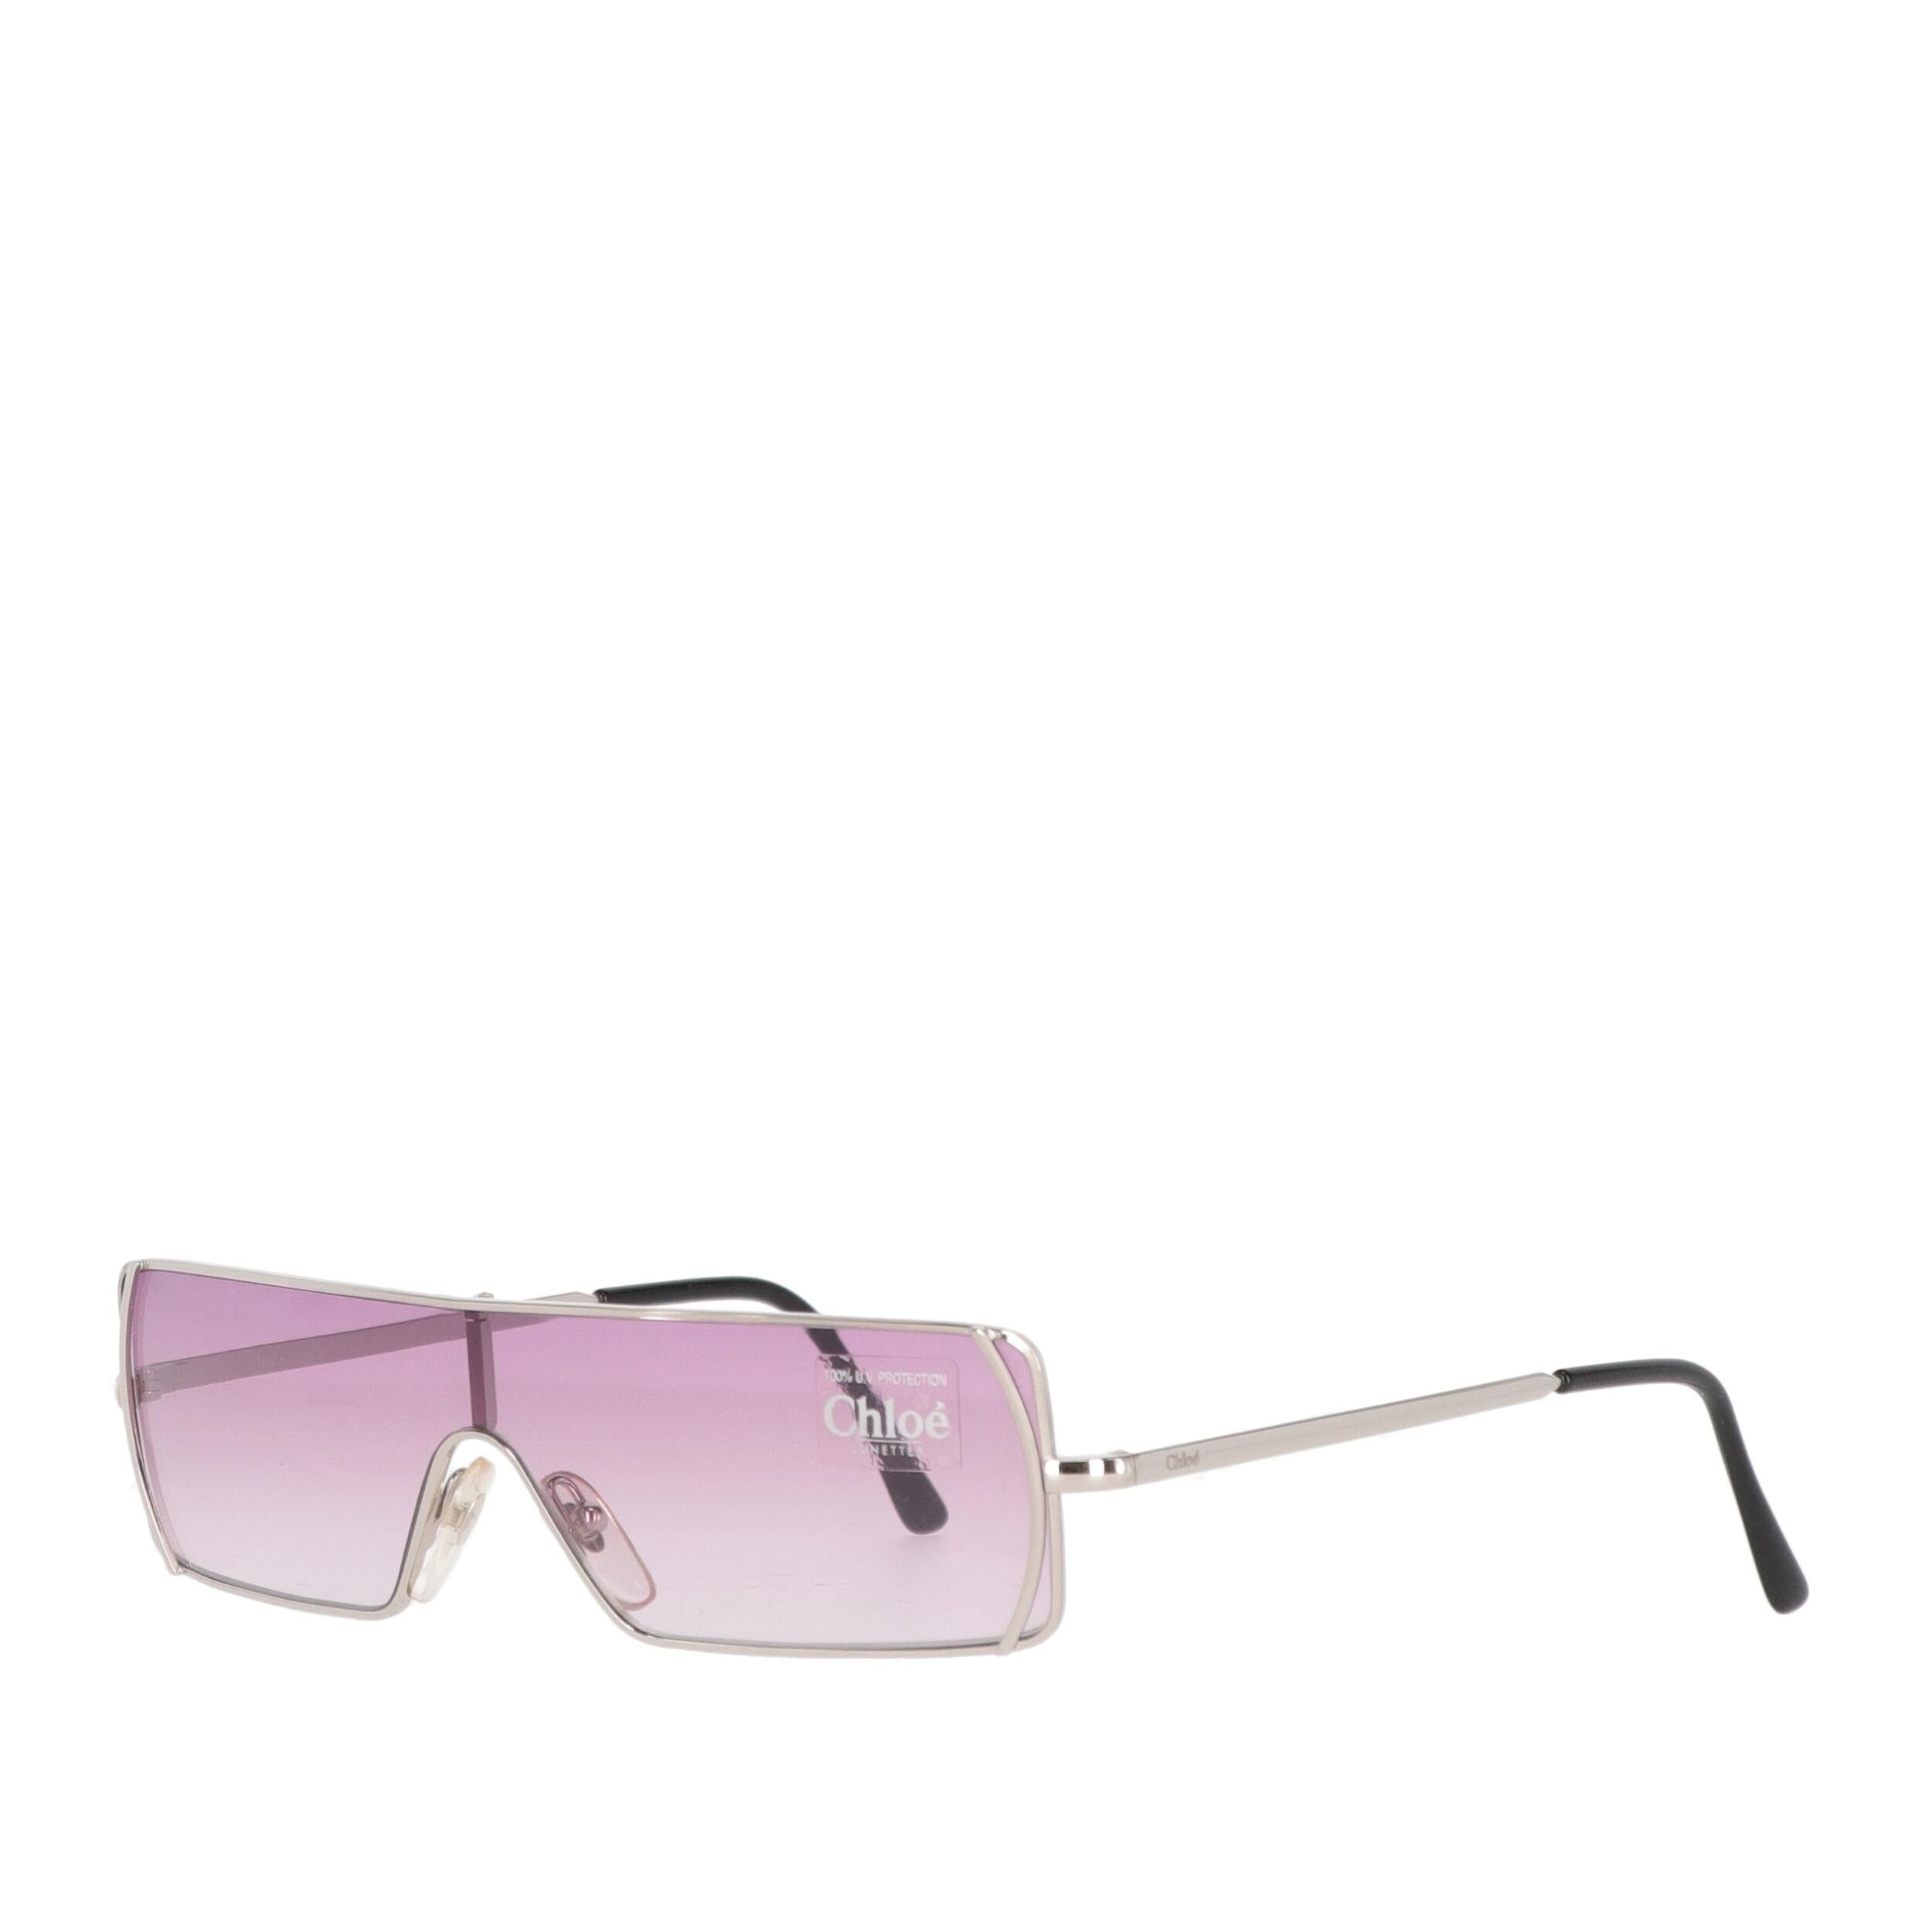 Chloé mask sunglasse, silver-tone metal frame and lilac lenses.
Please note, this item cannot be shipped to the US.

Years: 2000s

Made in Italy

Width: 13,5 cm
Height: 3,5 cm